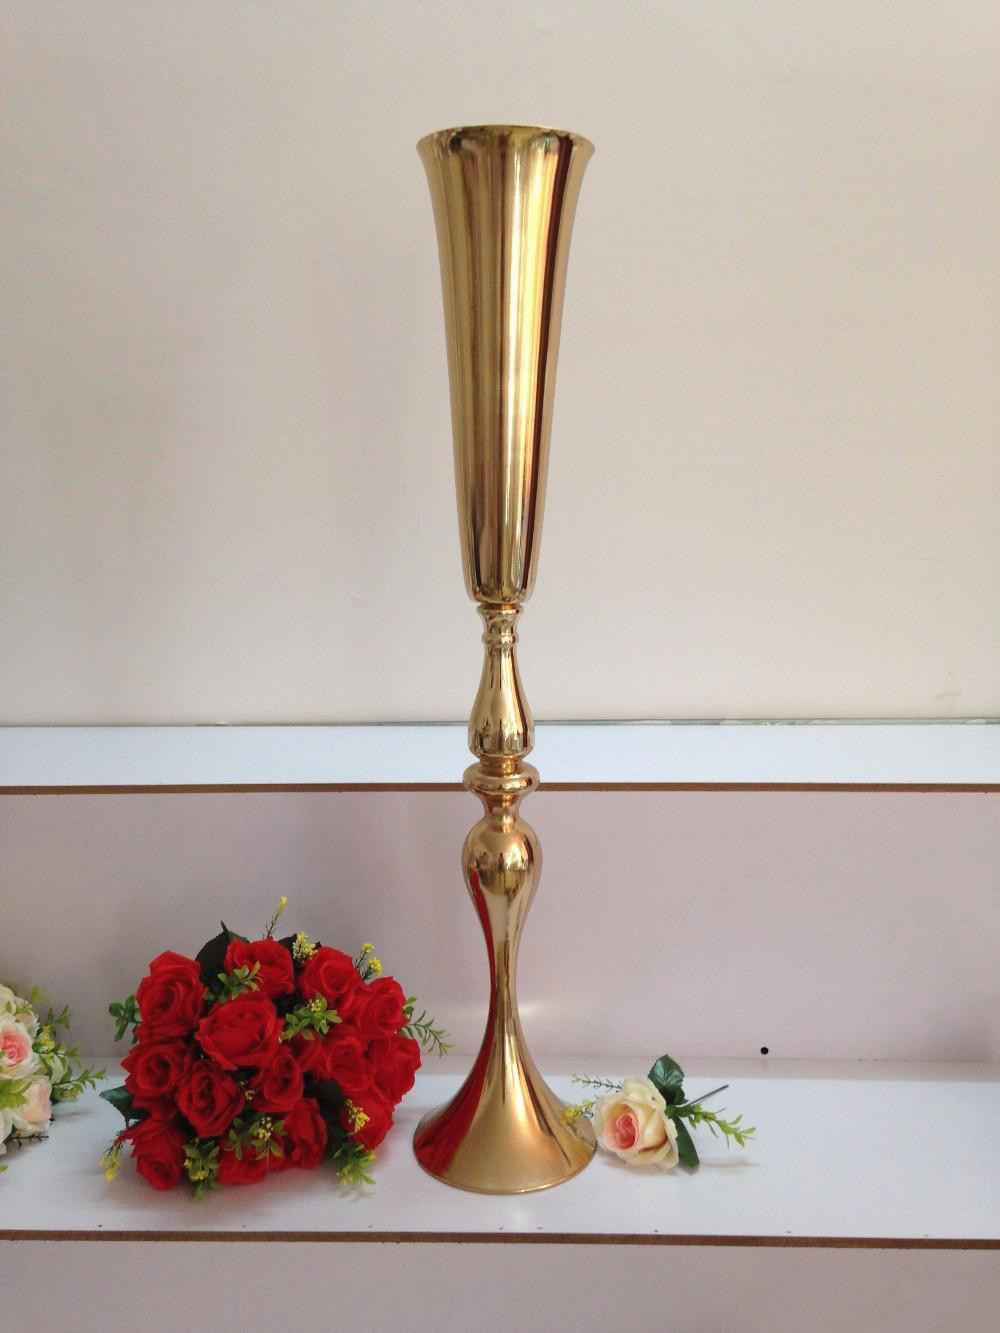 10 Fashionable Gold Vases wholesale 2024 free download gold vases wholesale of tall gold vases image faux crystal candle holders alive vases gold with tall gold vases image faux crystal candle holders alive vases gold tall jpgi 0d cheap in